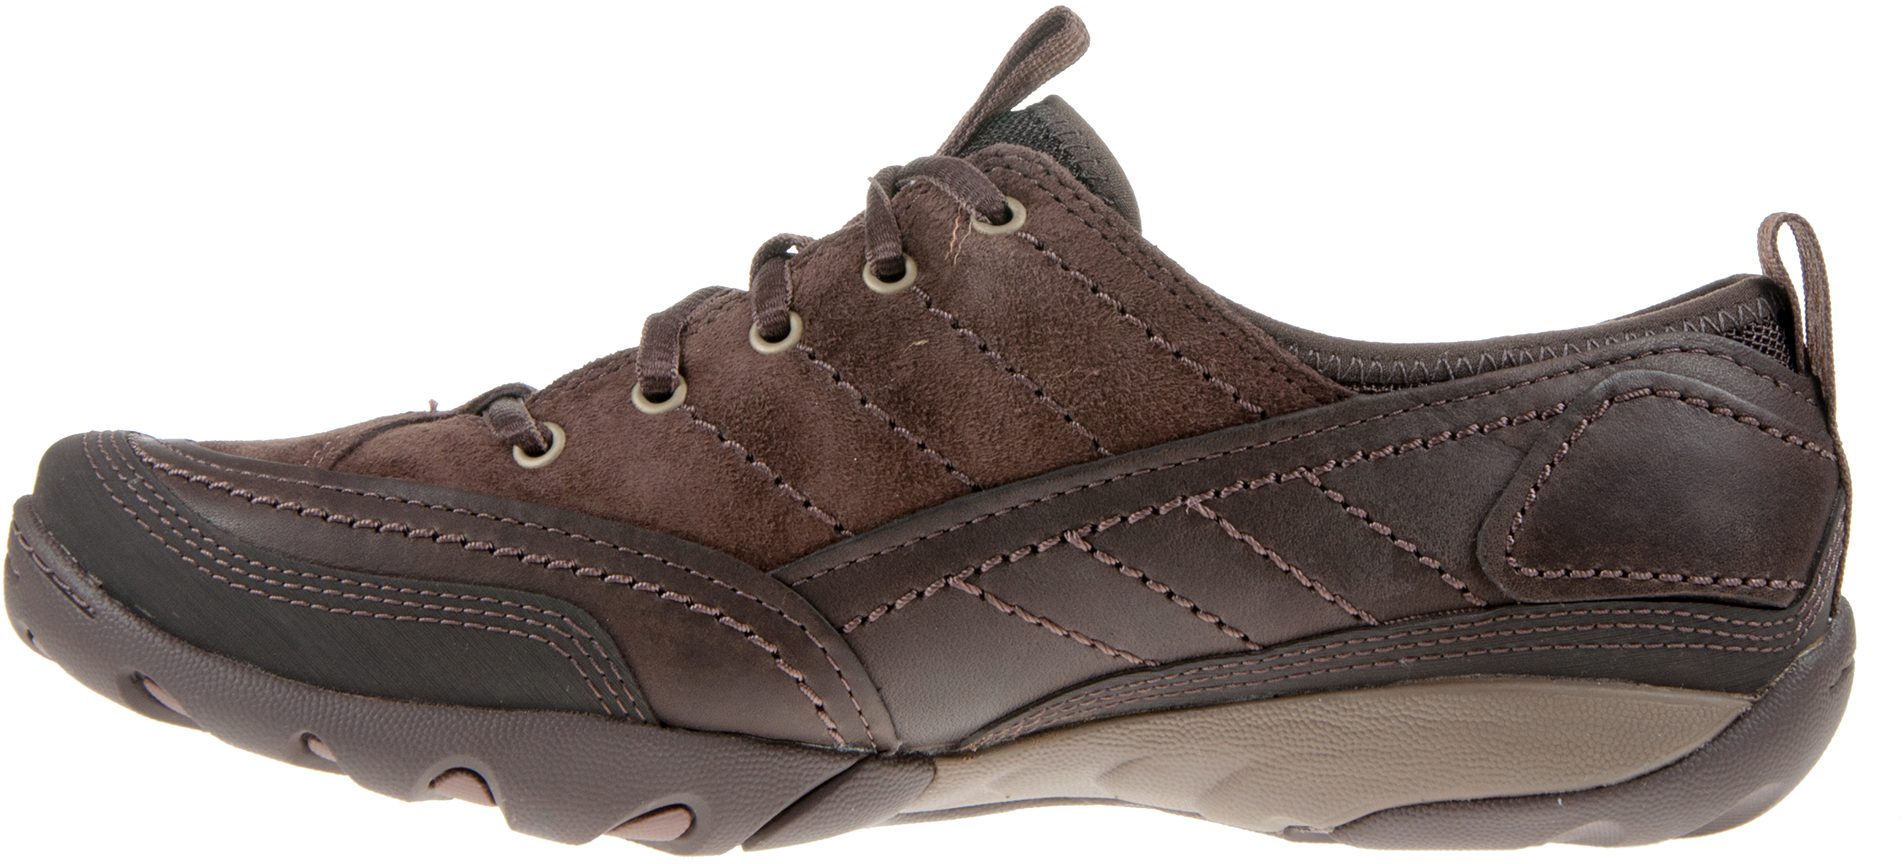 Merrell Mimosa II Lace Leather Espresso J45574 - Outdoor Shoes ...